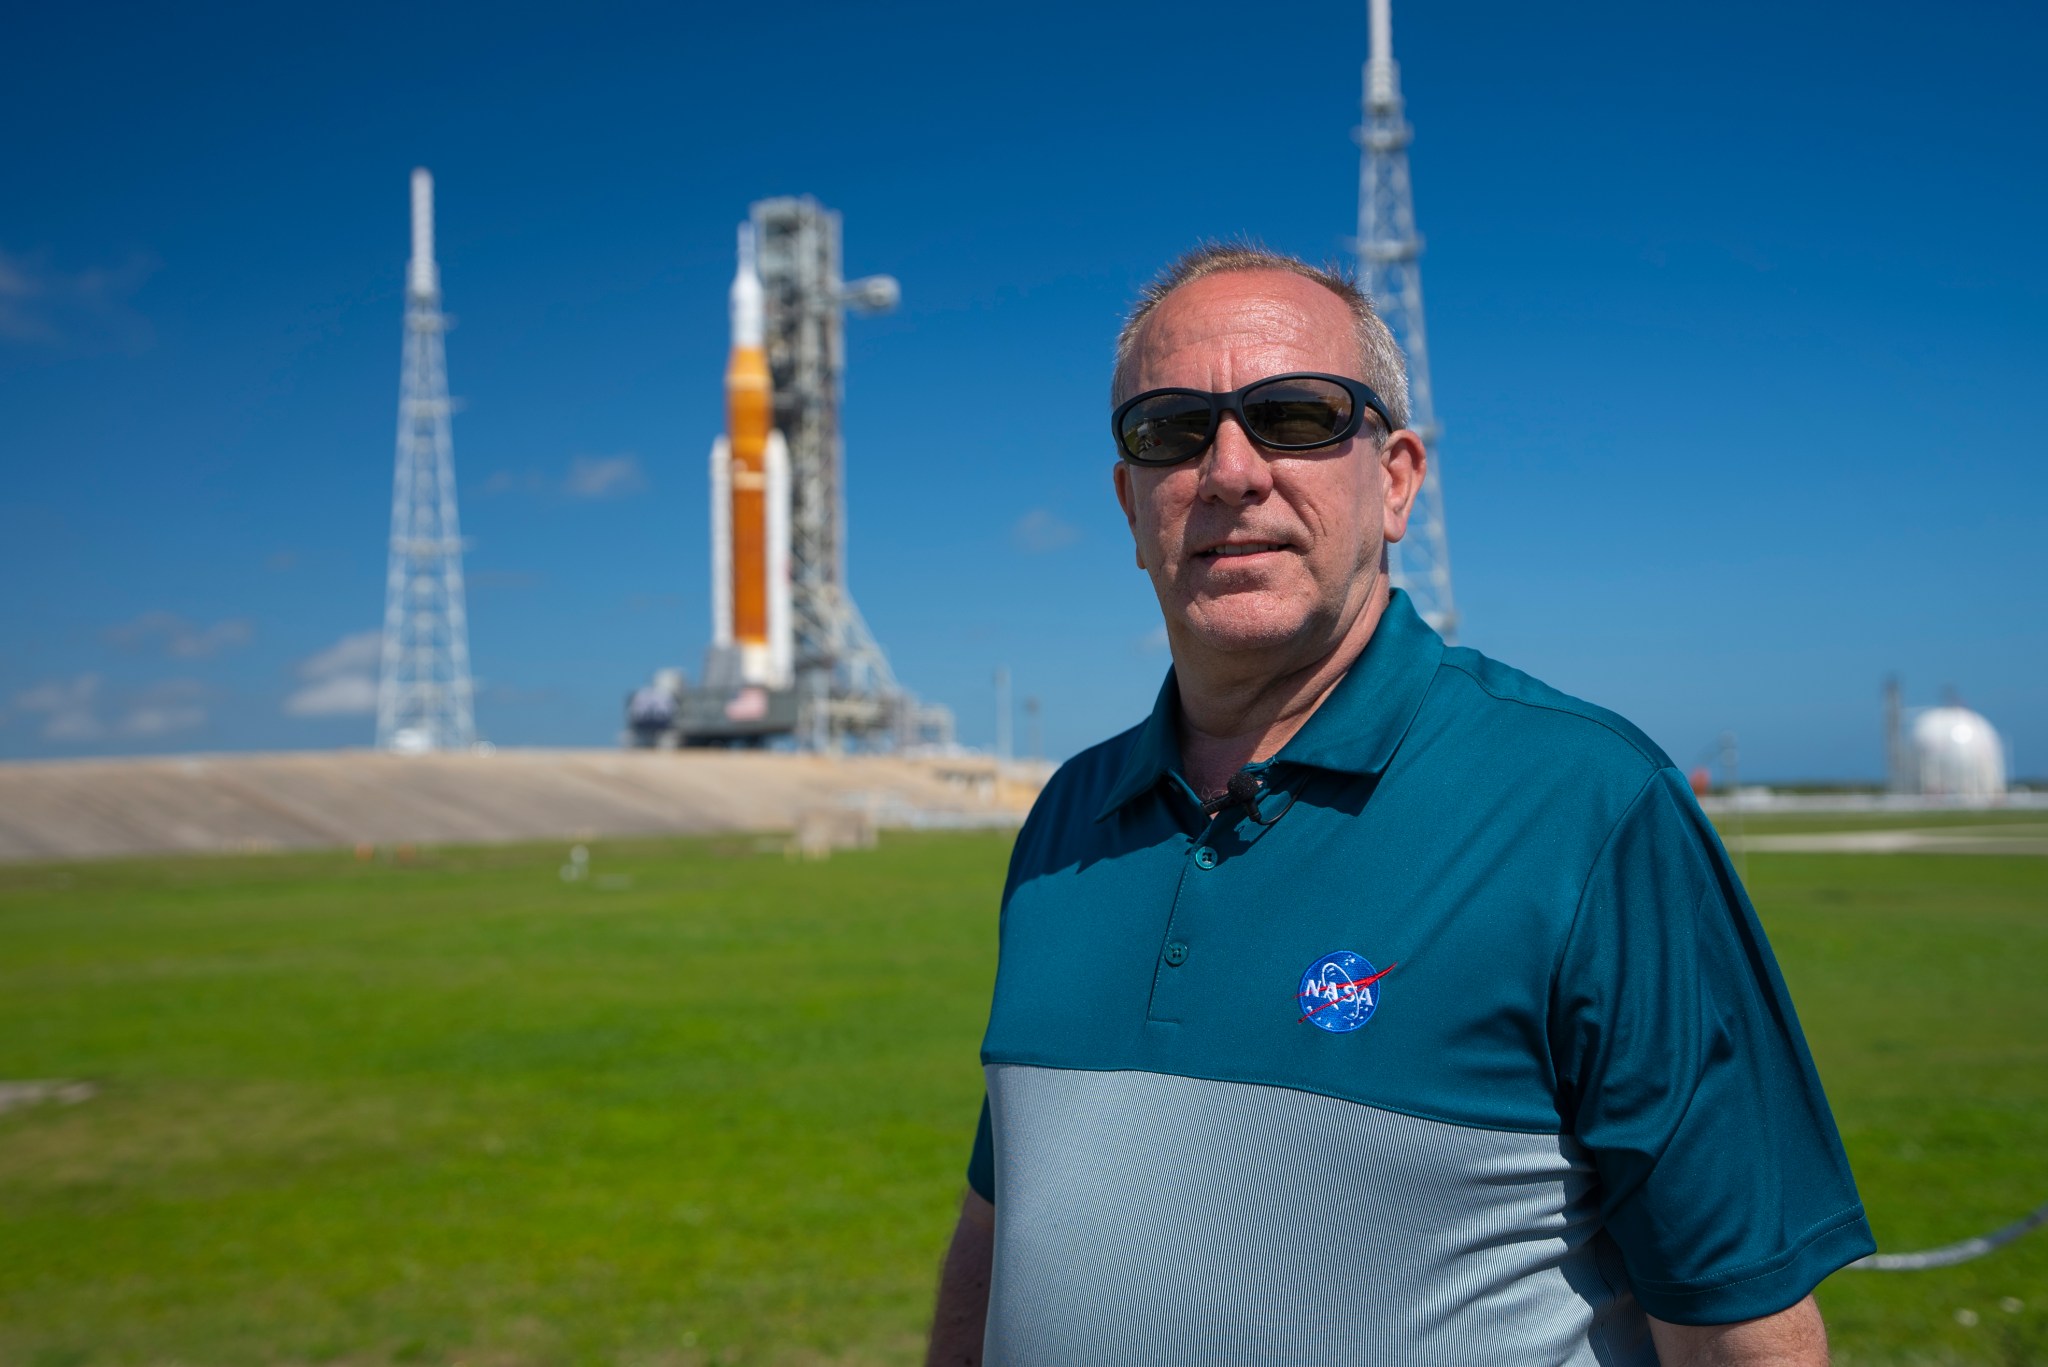 In March 2022, David Beaman, manager of the Space Launch System (SLS) Engineering & Integration Office at NASA’s Marshall Space Flight Center in Huntsville, Alabama, views the SLS rocket on the launch pad when it rolled out the first time.